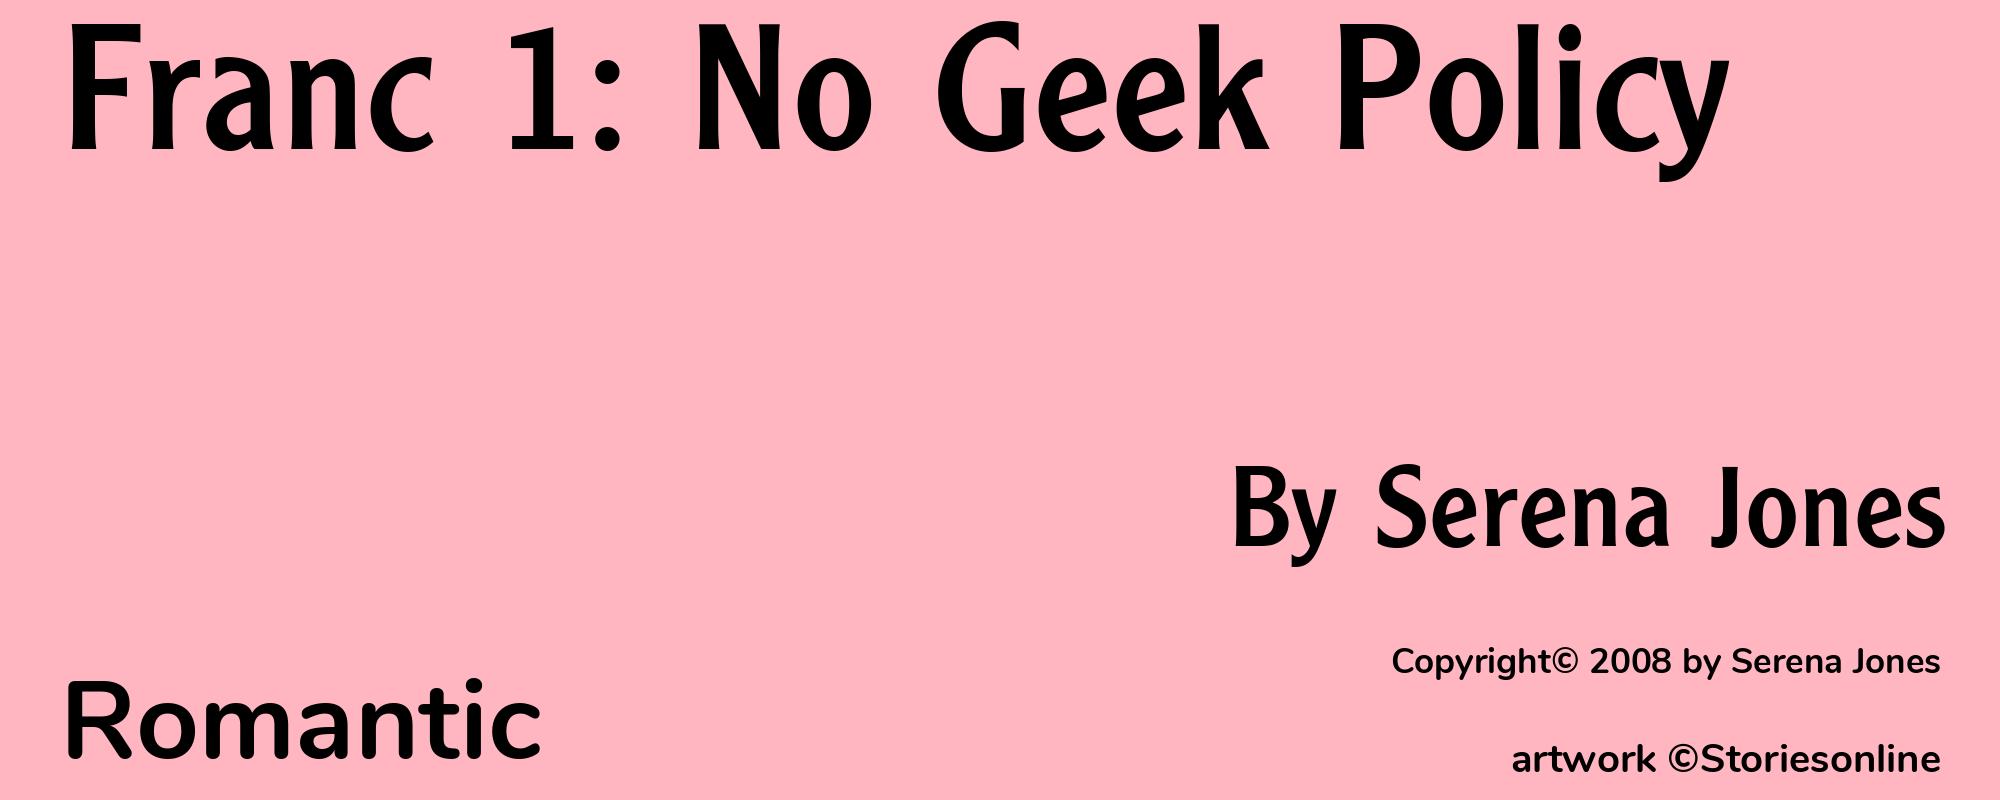 Franc 1: No Geek Policy - Cover